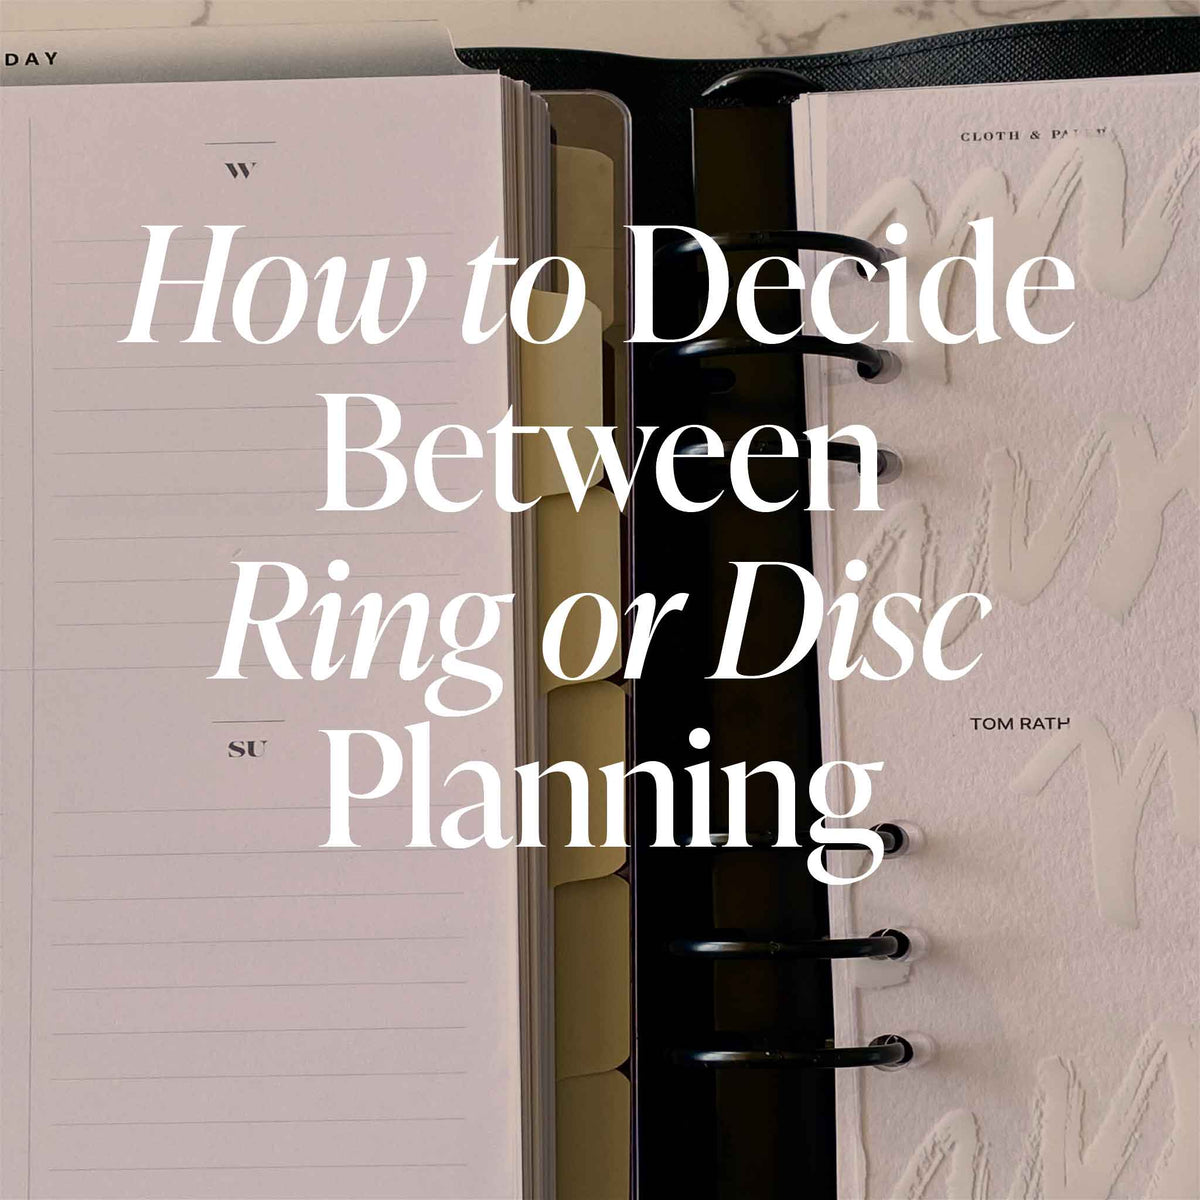 How to Decide Between Ring or Disc Planning – CLOTH & PAPER